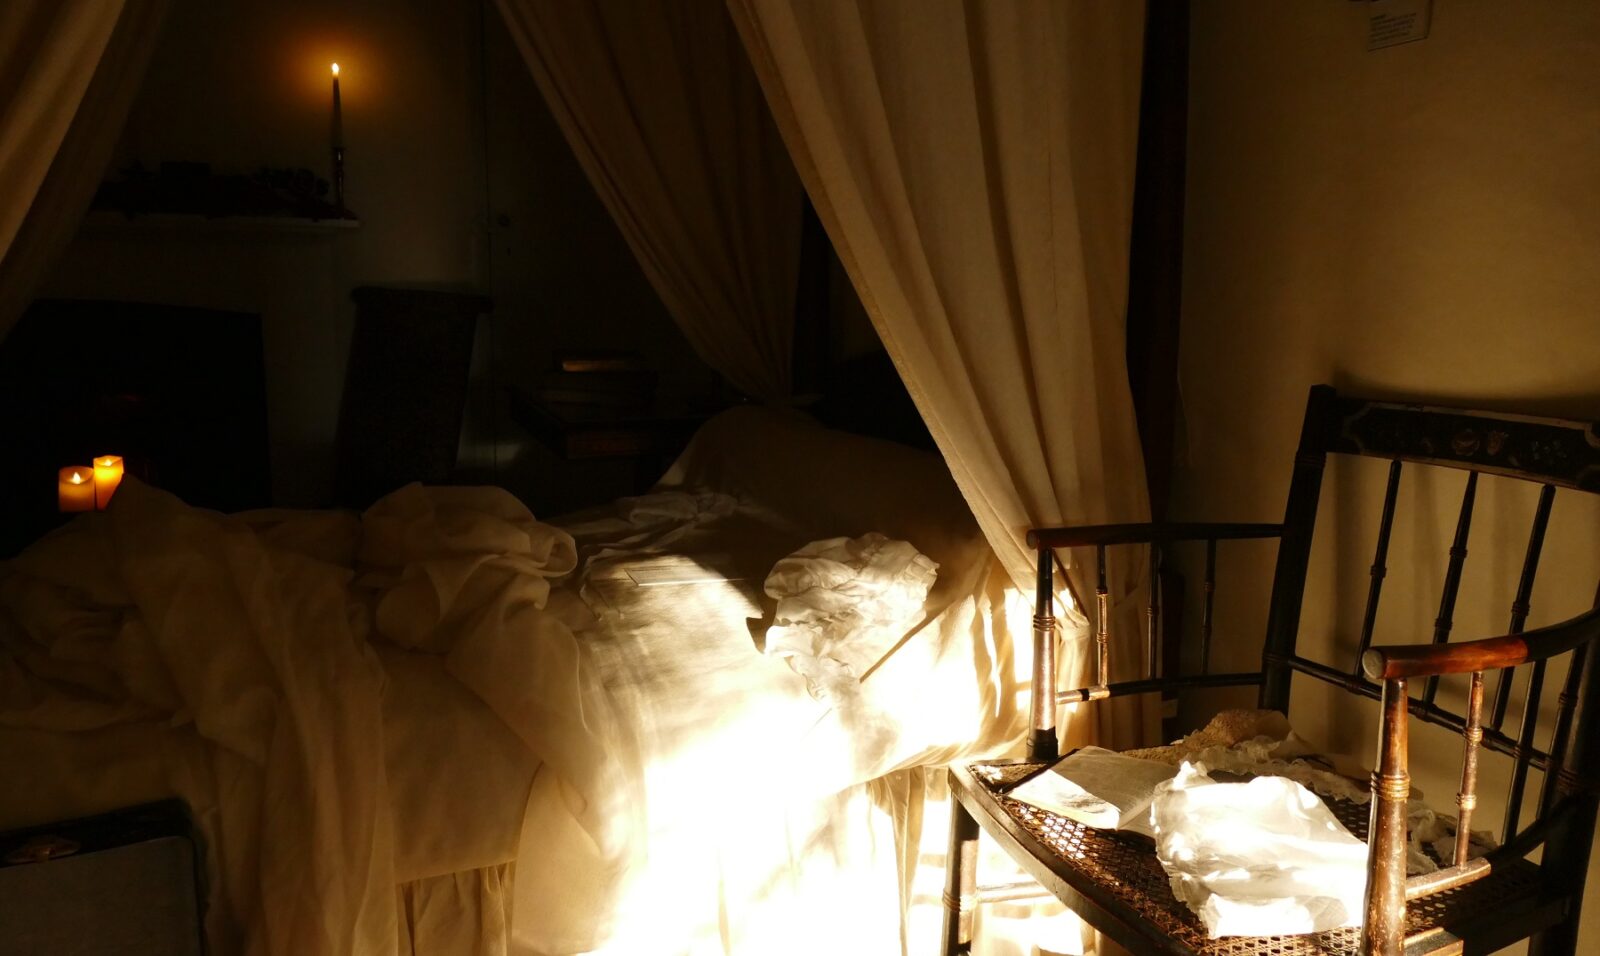 In Jane Austen's bedroom, the scene of her birth is recreated with tousled sheets and baby muslins